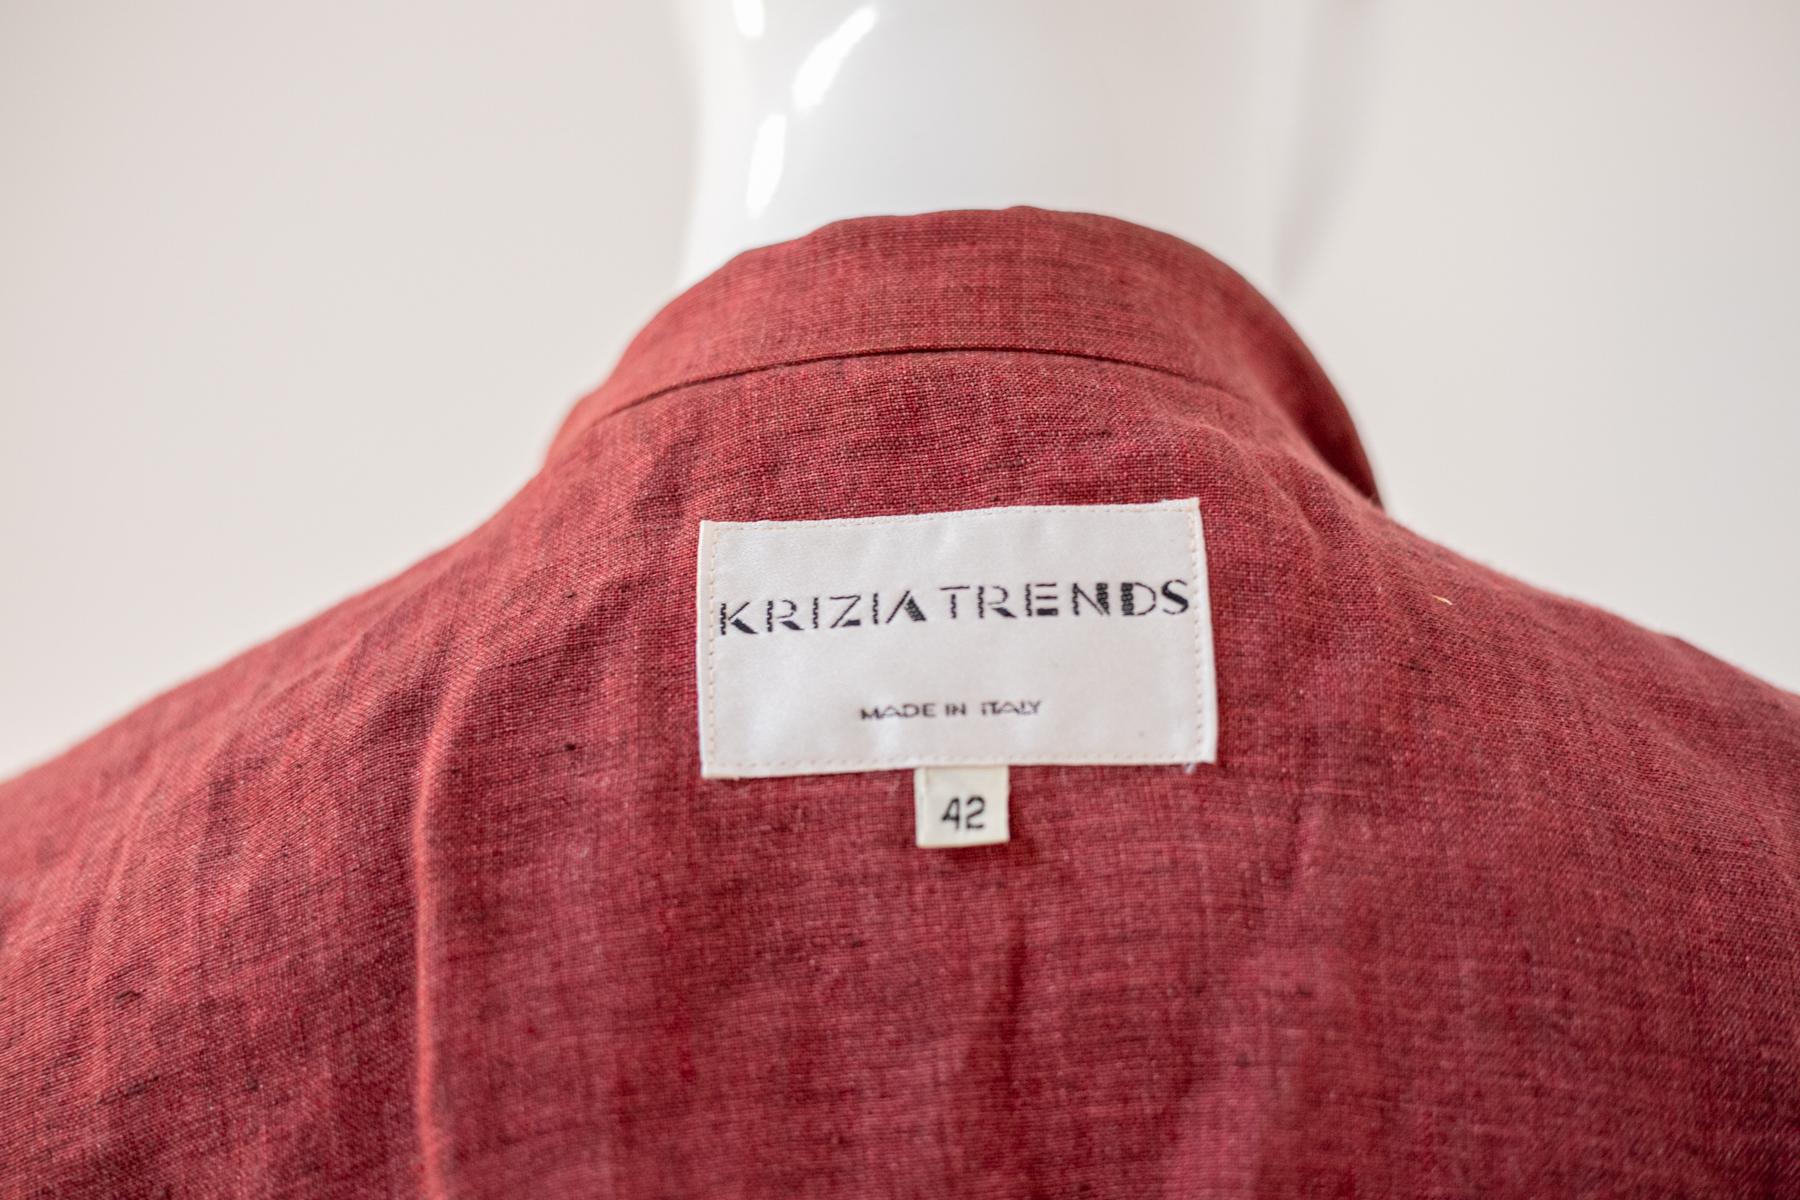 Beautiful and fresh vintage linen shirt designed by Krizia in the 1990s, made in Italy.
The collar has the typical list cut, with the slit in the middle, very soft connects to the central part of the shirt consisting of 3 round golden, elegant